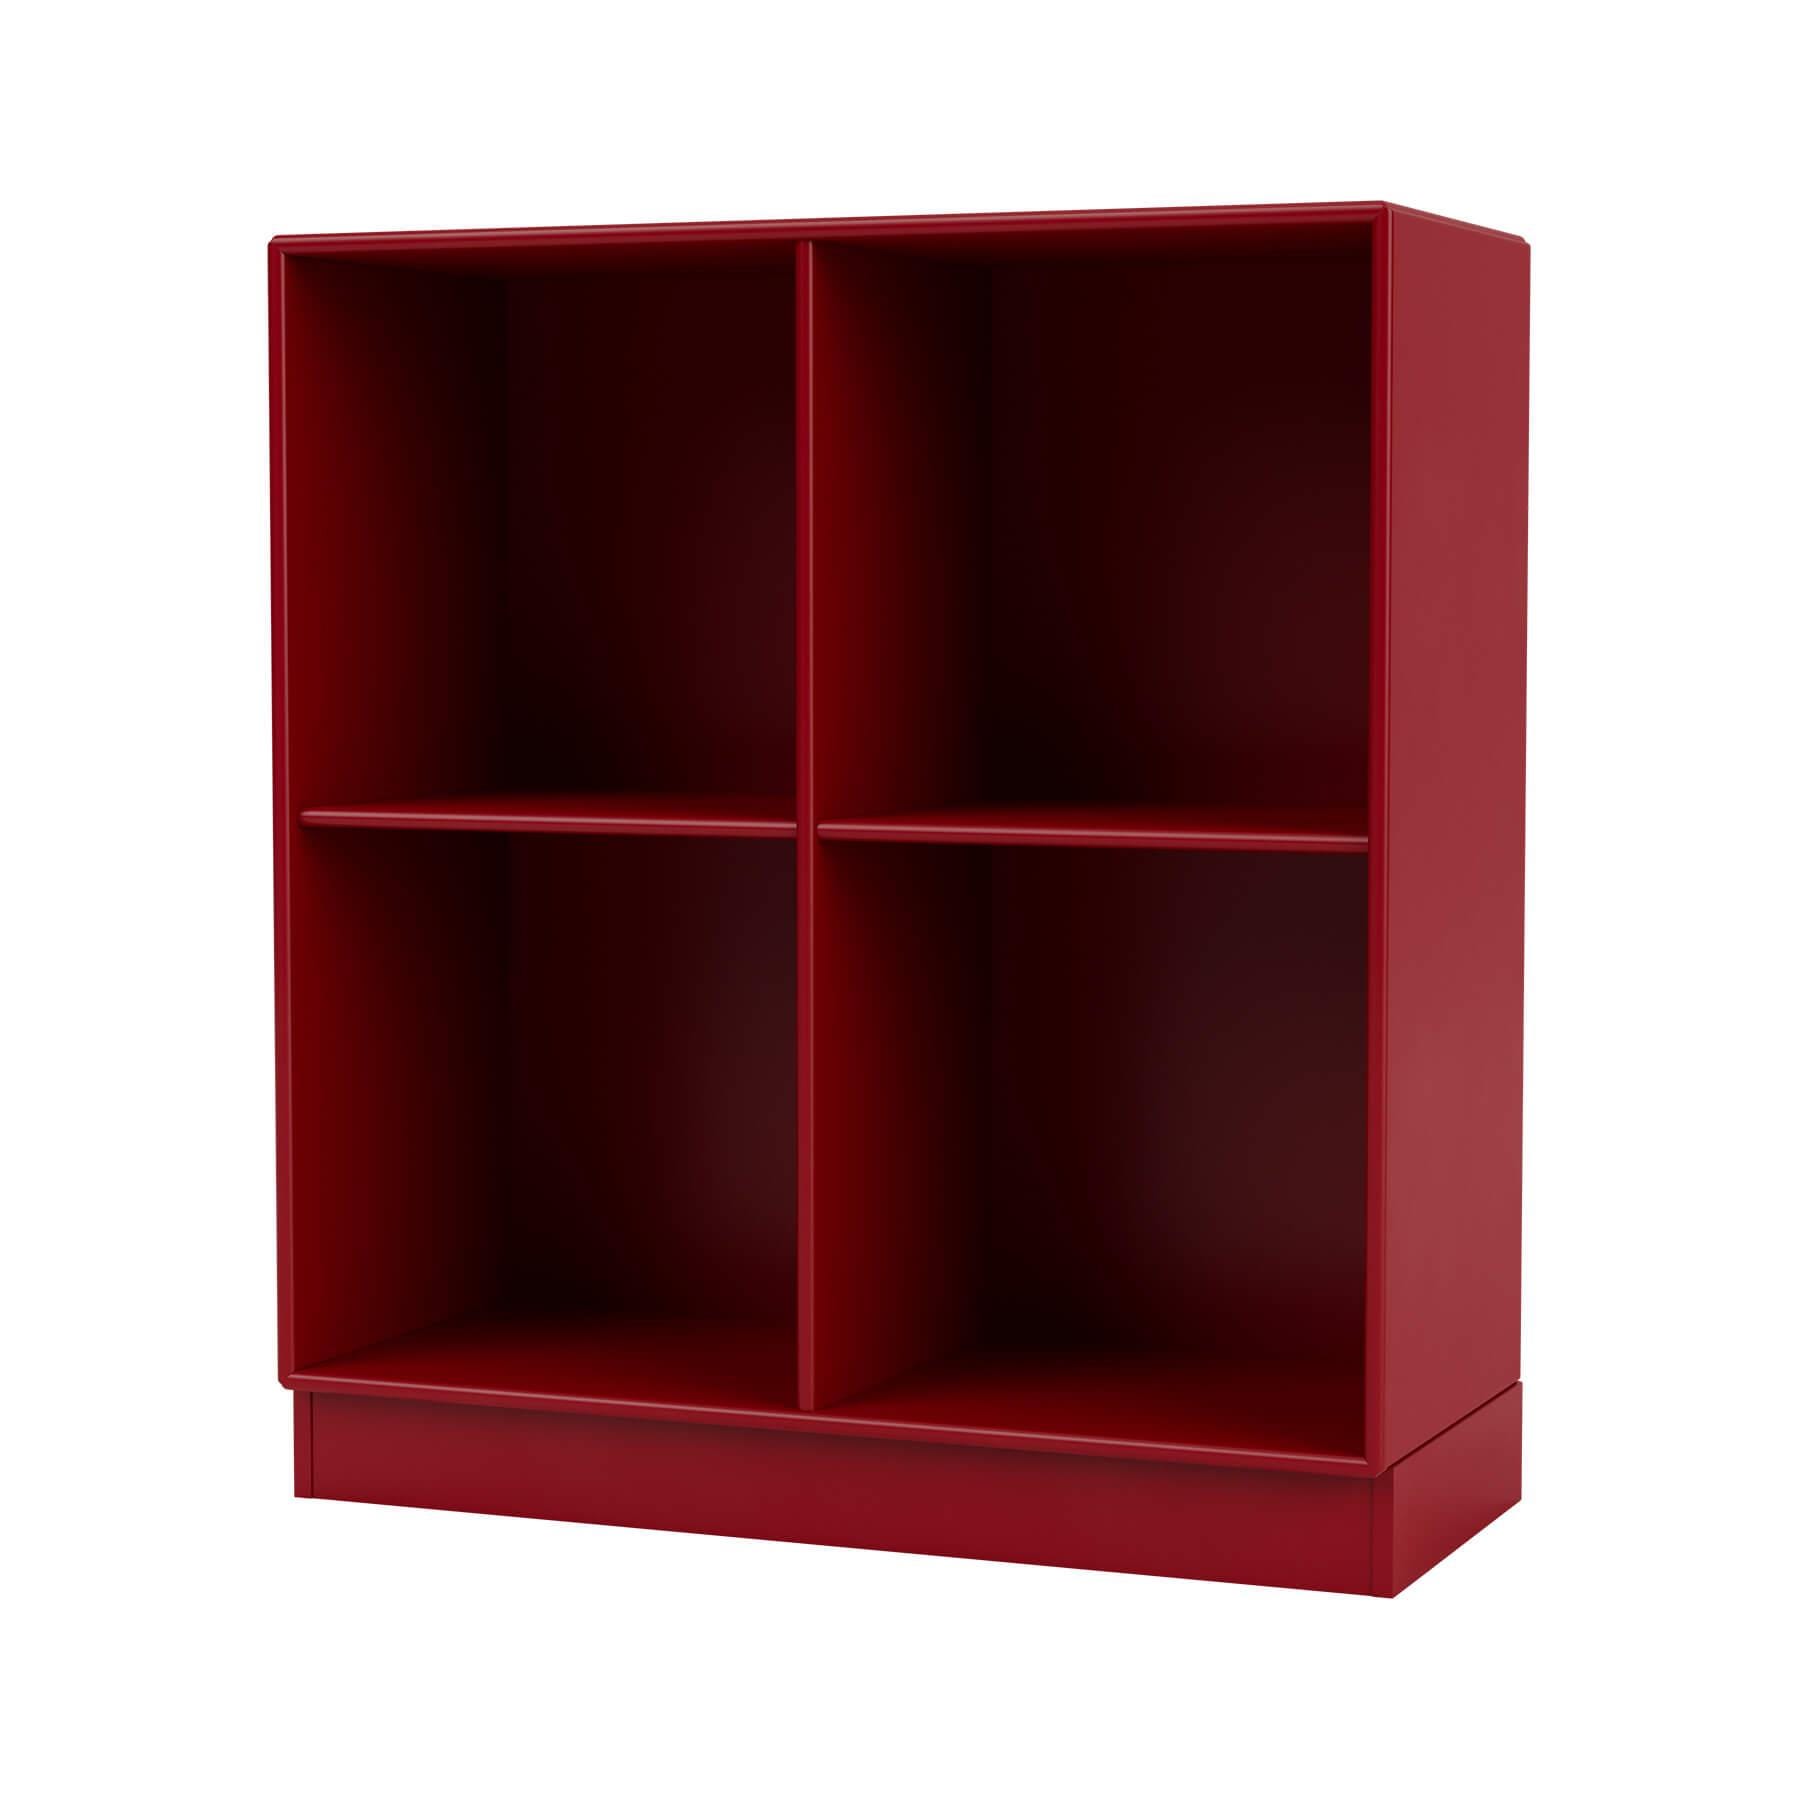 Montana Show Bookcase Beetroot Plinth Purple Designer Furniture From Holloways Of Ludlow